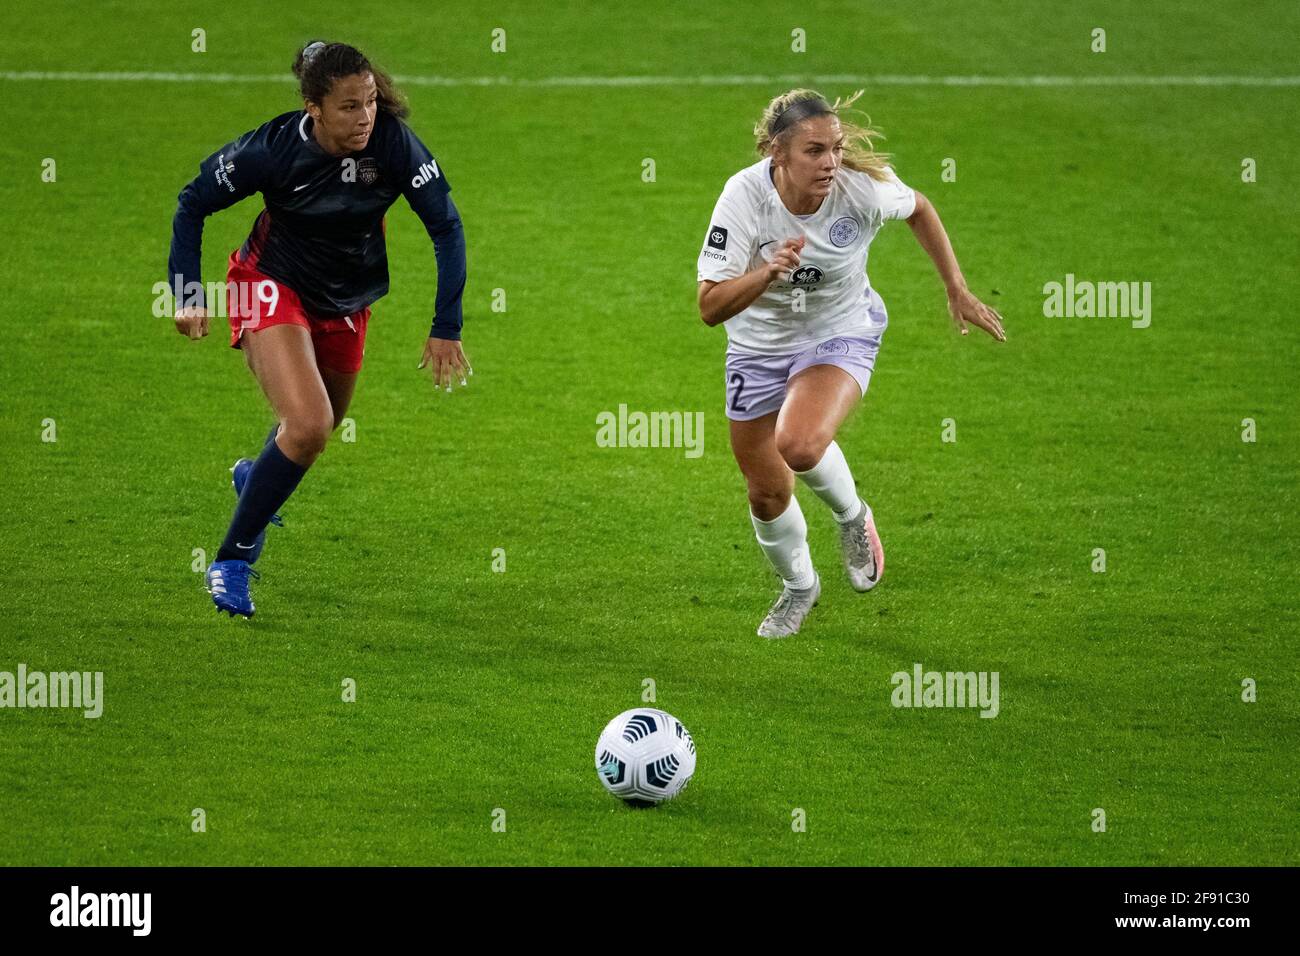 Washington, USA. 15th Apr, 2021. Washington Spirit defender Tegan McGrady chases Racing Louisville FC forward Katie McClure during a National Women's Soccer League (NWSL) Challenge Cup match between the Washington Spirit and Racing Louisville FC, in Washington, DC, on April 15, 2021. The Challenge Cup match ended in a 1-0 Washington win, after a stoppage time goal from an Ashley Sanchez volley off a Trinity Rodman cross. (Graeme Sloan/Sipa USA) Credit: Sipa USA/Alamy Live News Stock Photo